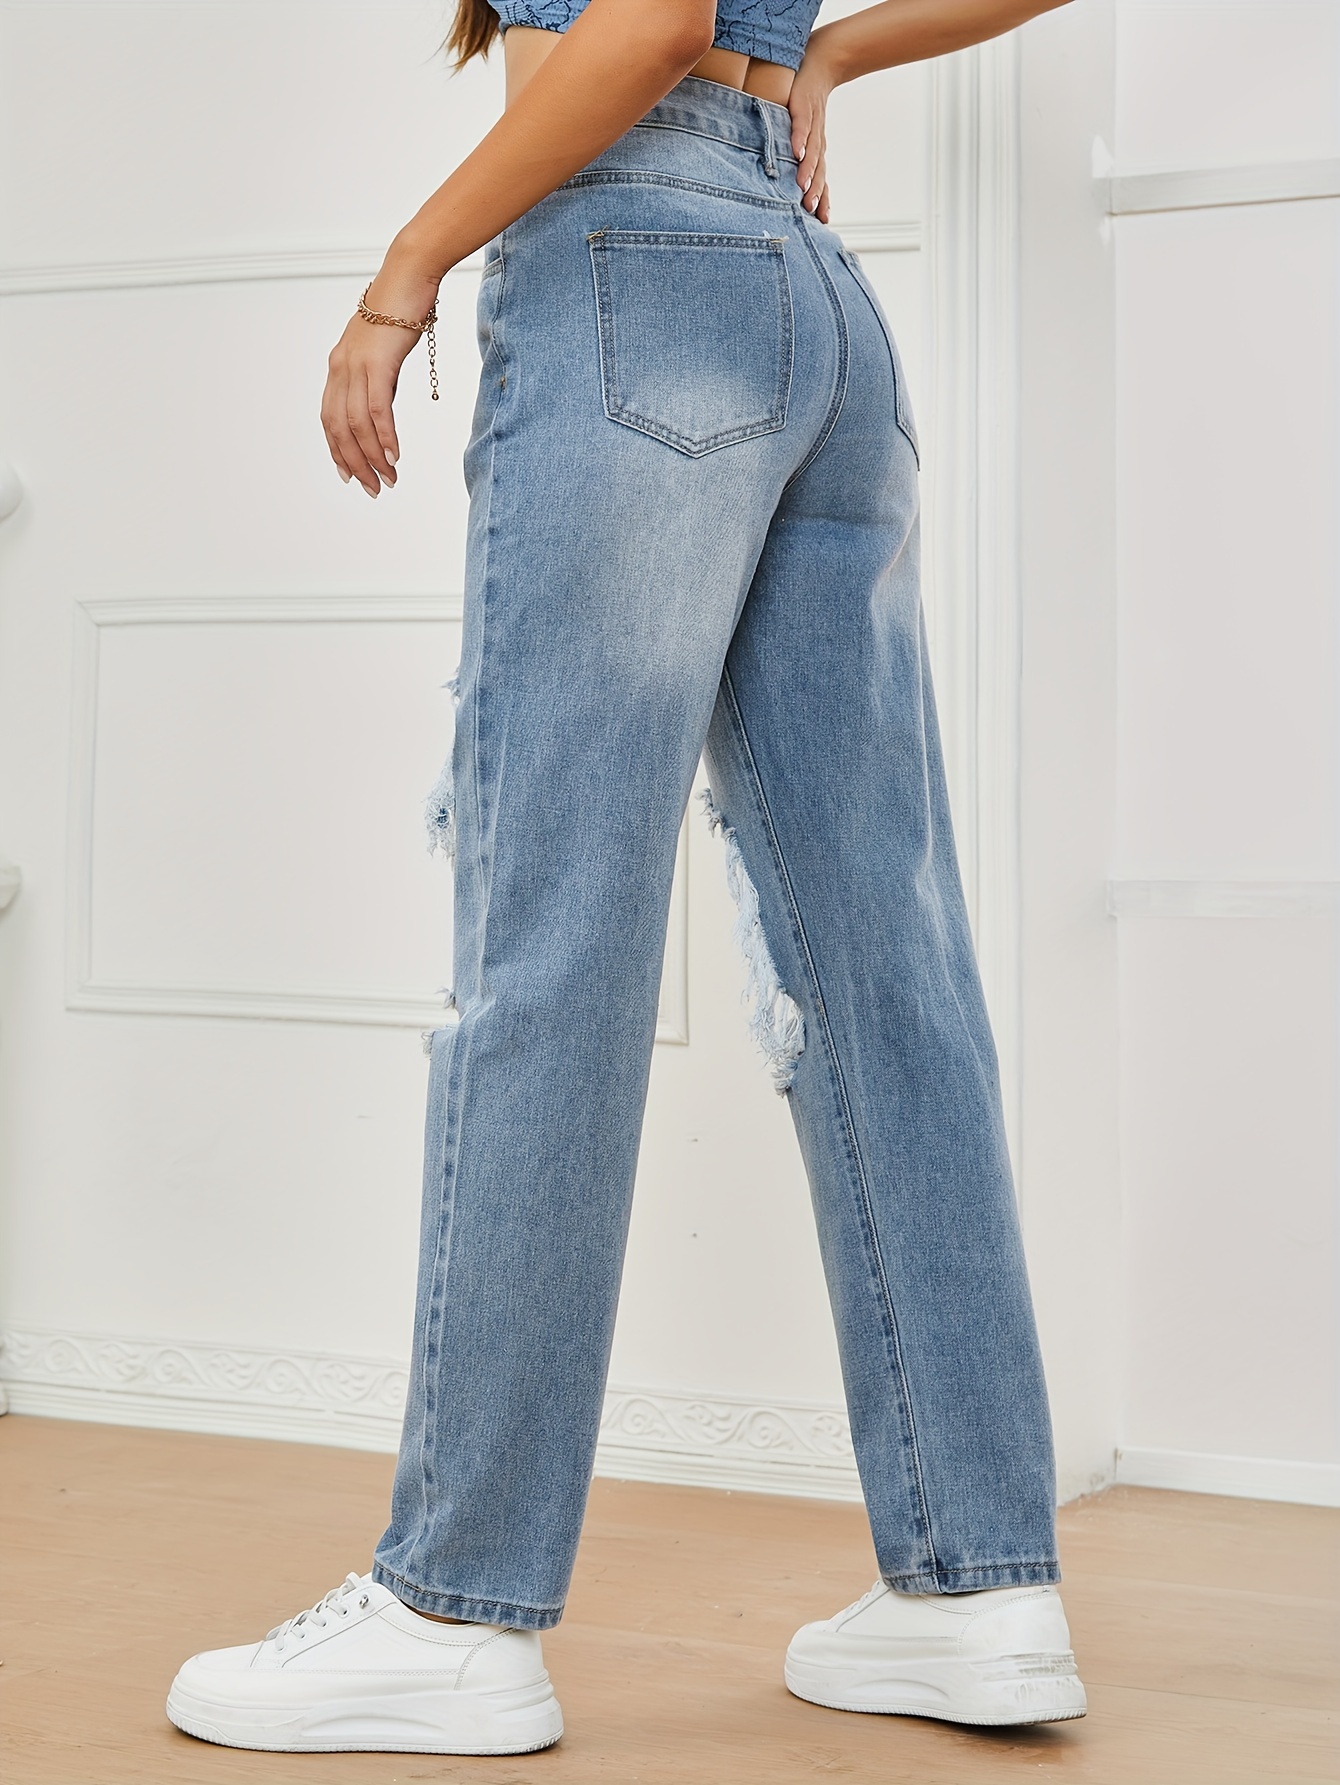 Ripped Holes Versatile Straight Jeans, High Waist Loose Fit Washed Denim  Pants, Women's Denim Jeans & Clothing